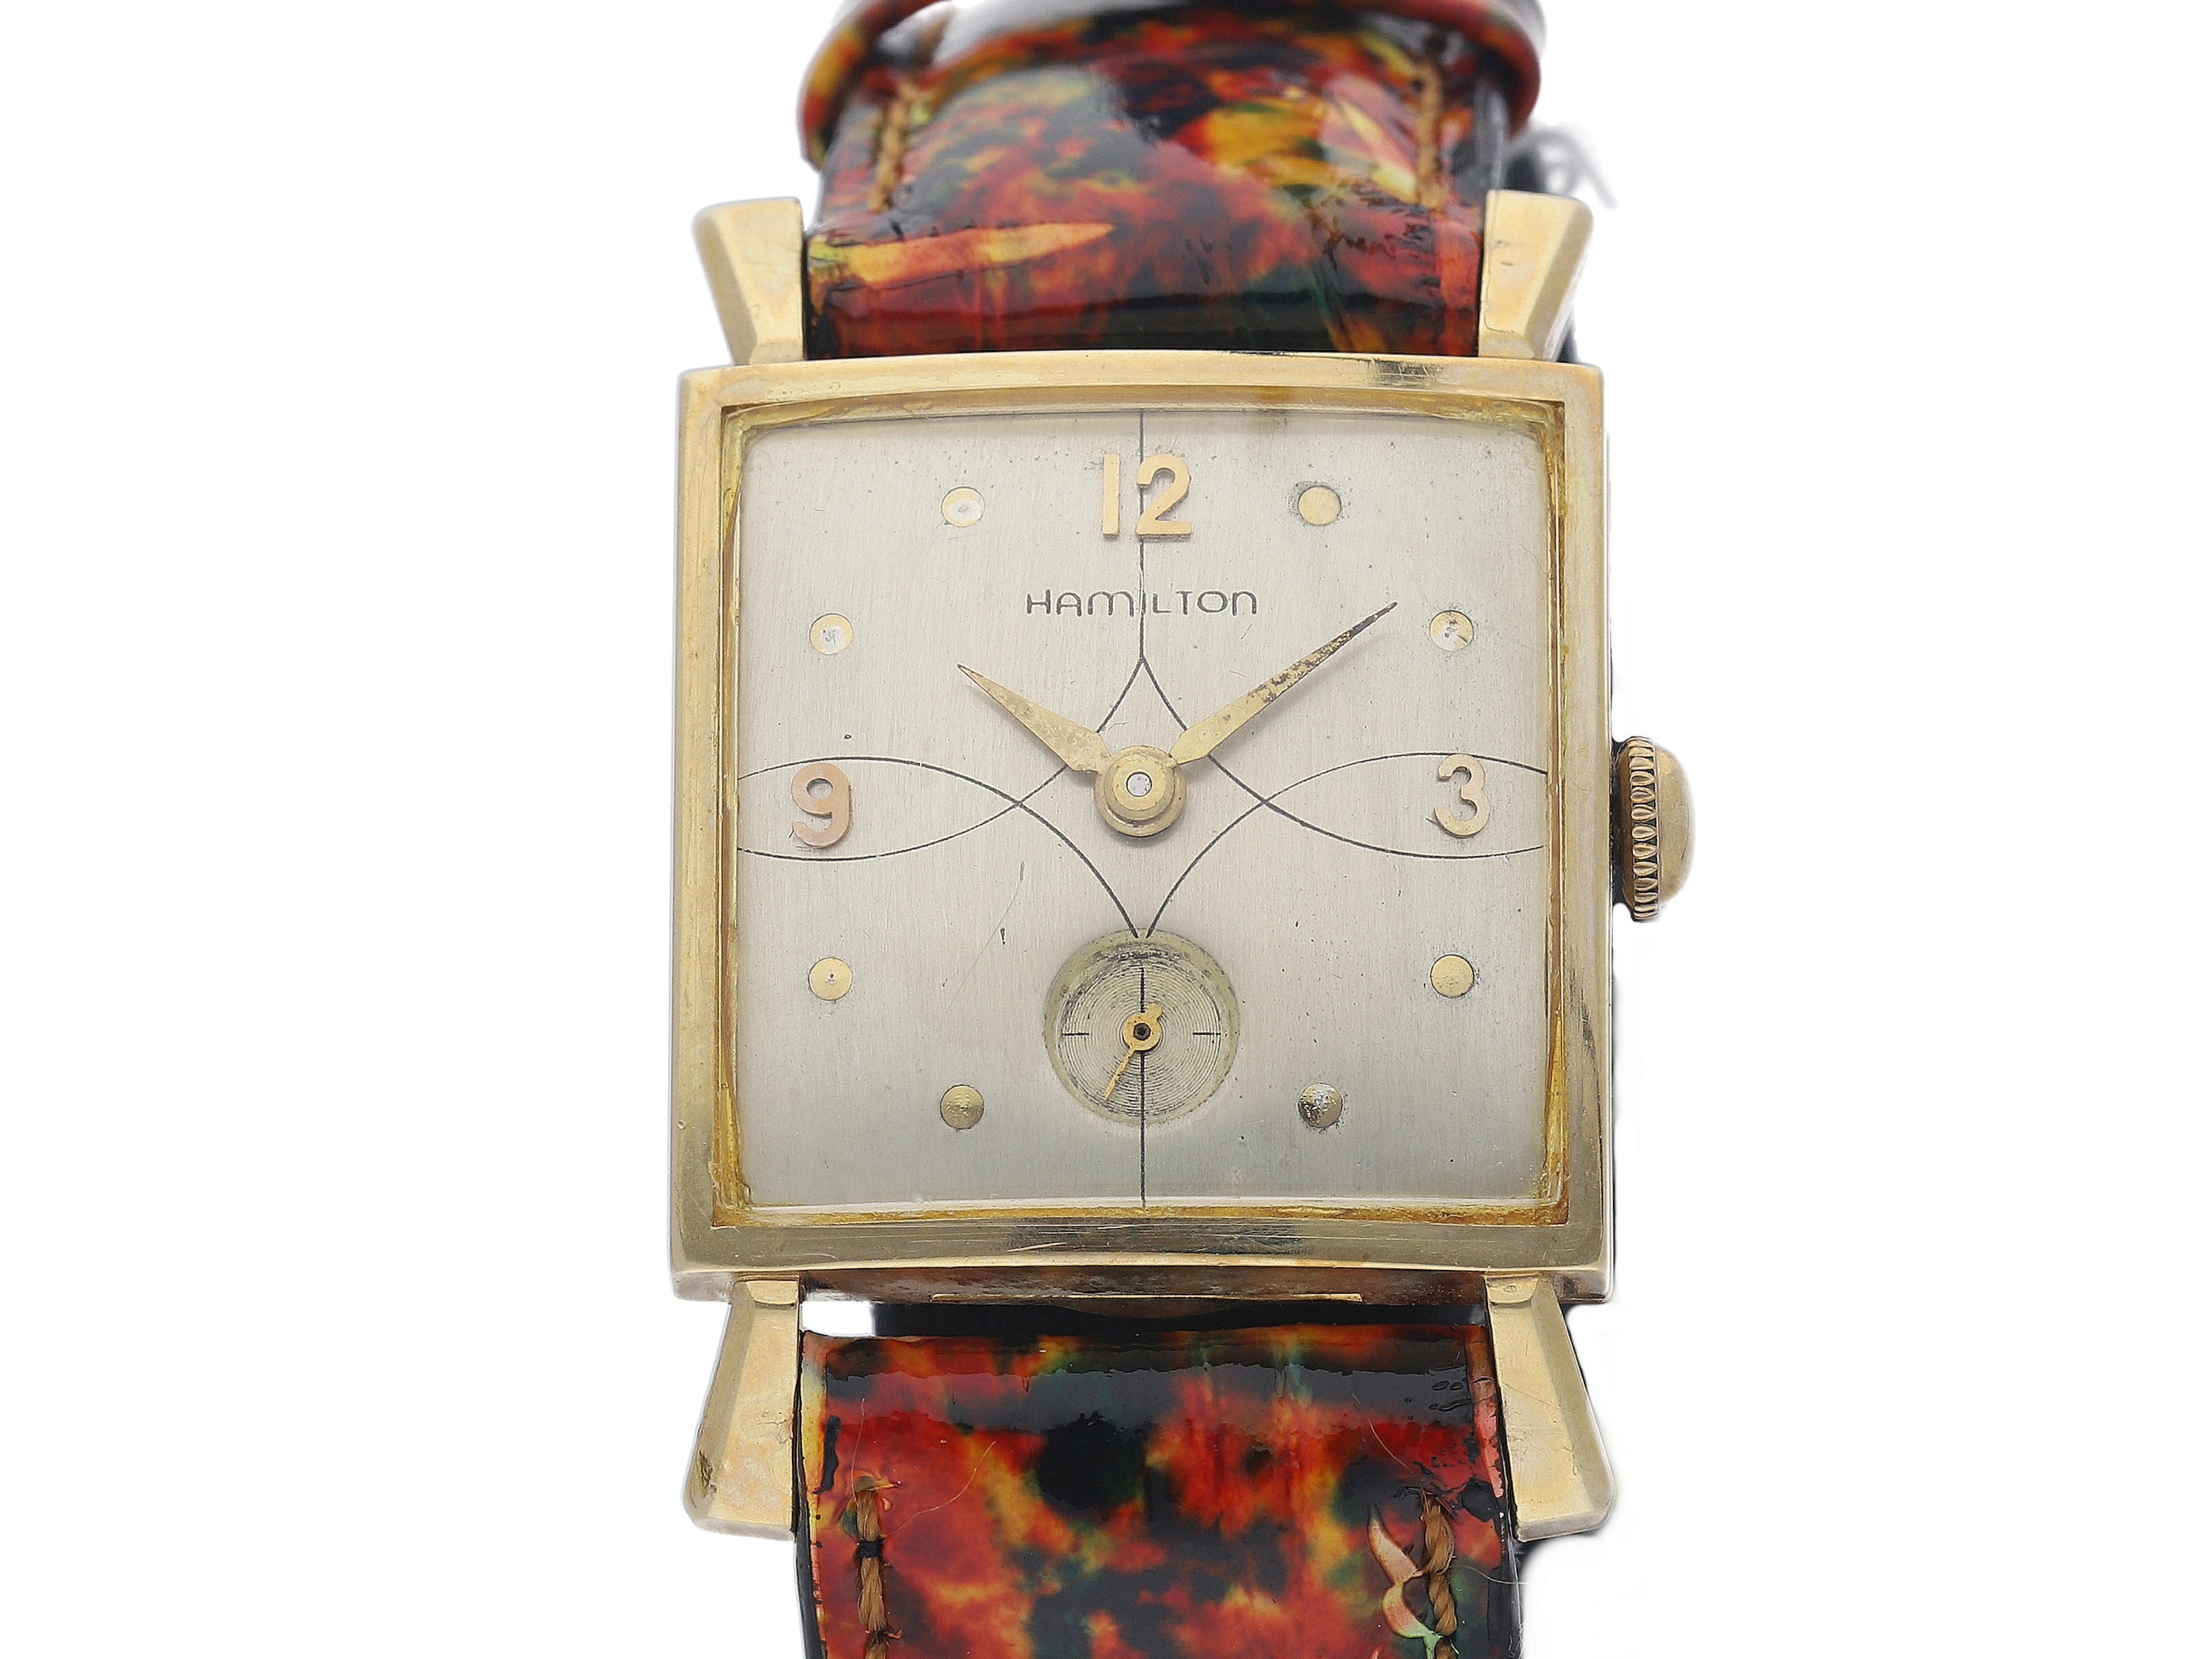 Hamilton. A 14K Yellow Gold Square Wristwatch with Fancy Lugs